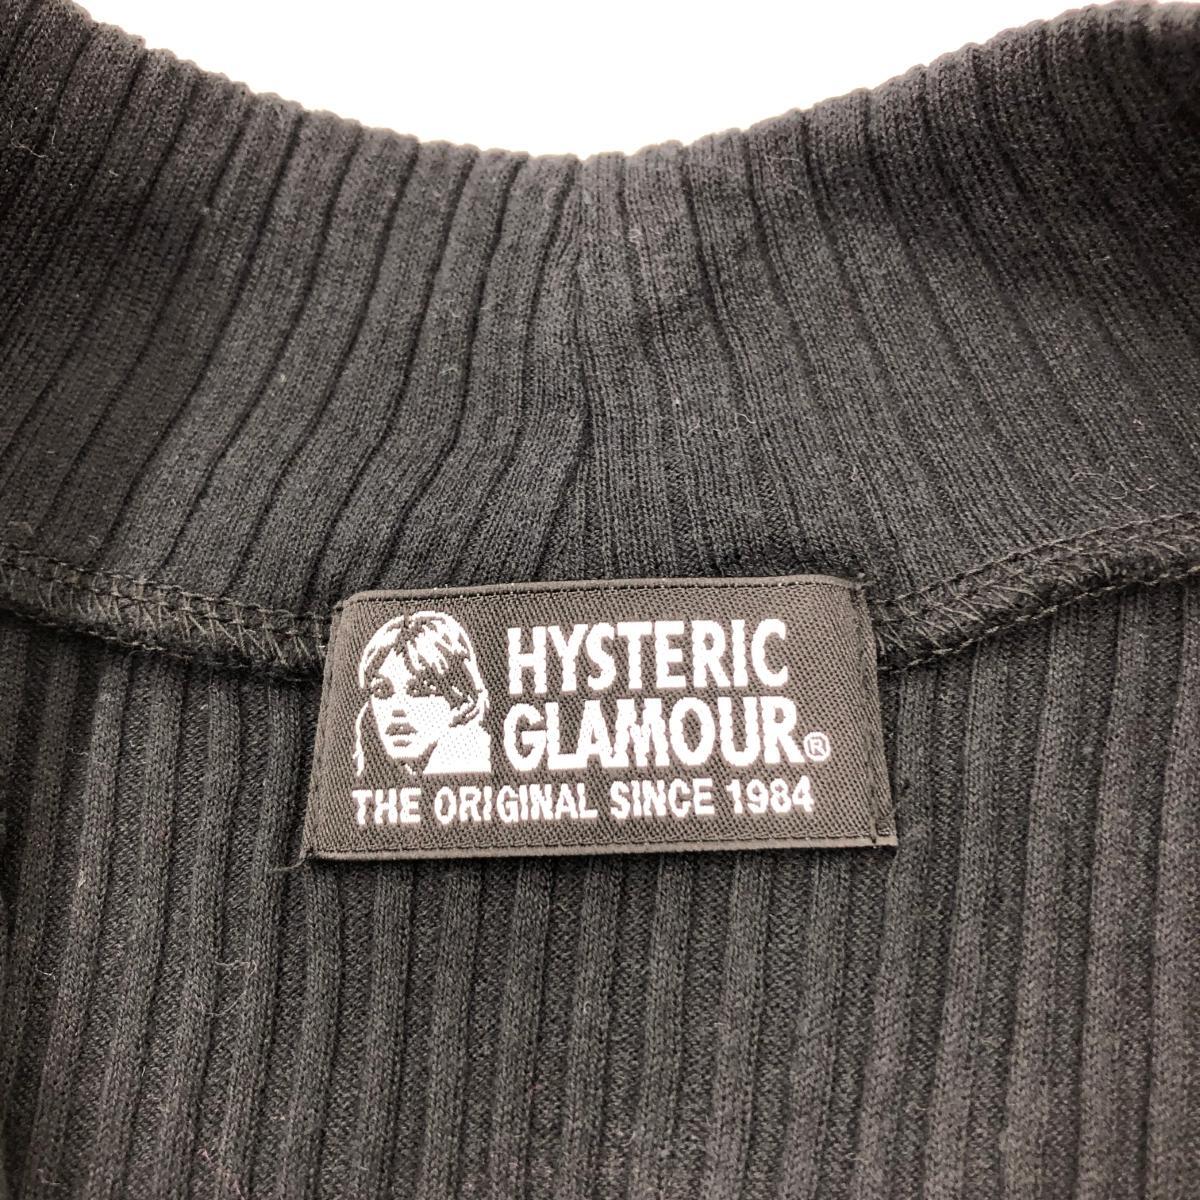  excellent *HYSTERIC GLAMOUR Hysteric Glamour half Zip cut and sewn size free * black cotton lady's tops no sleeve 